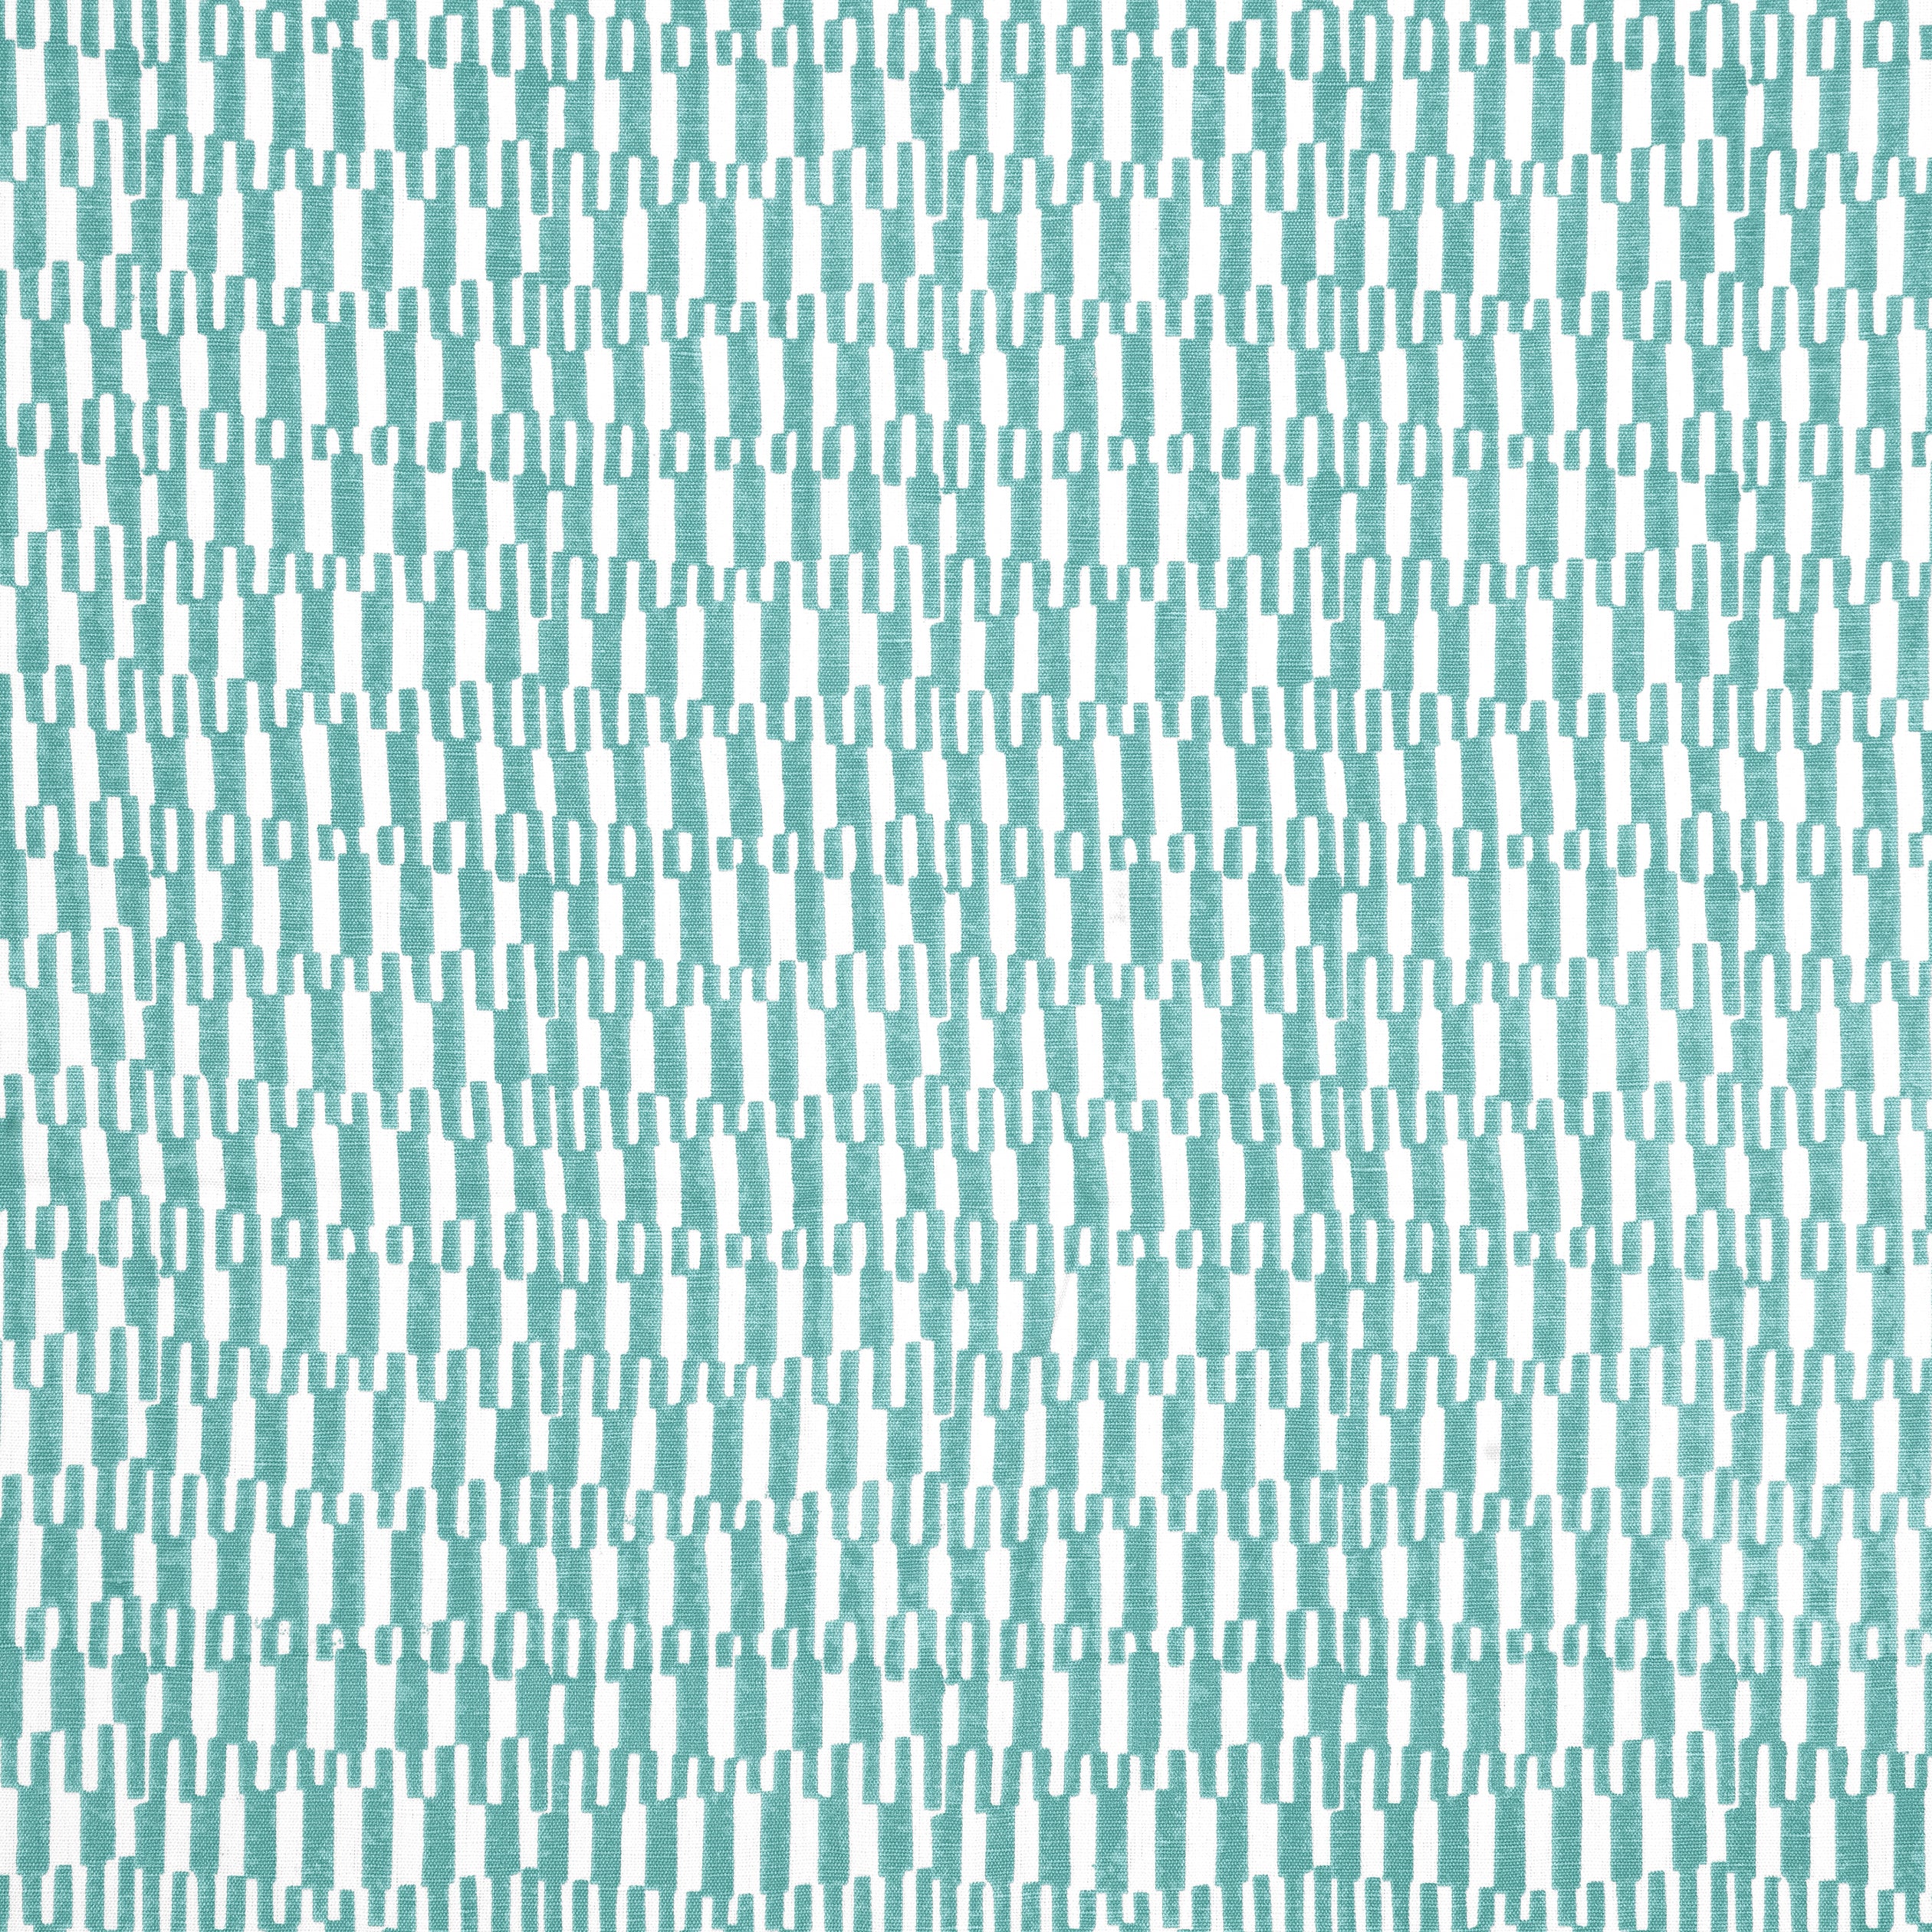 Gogo fabric in spa blue color - pattern number F920807 - by Thibaut in the Eden collection